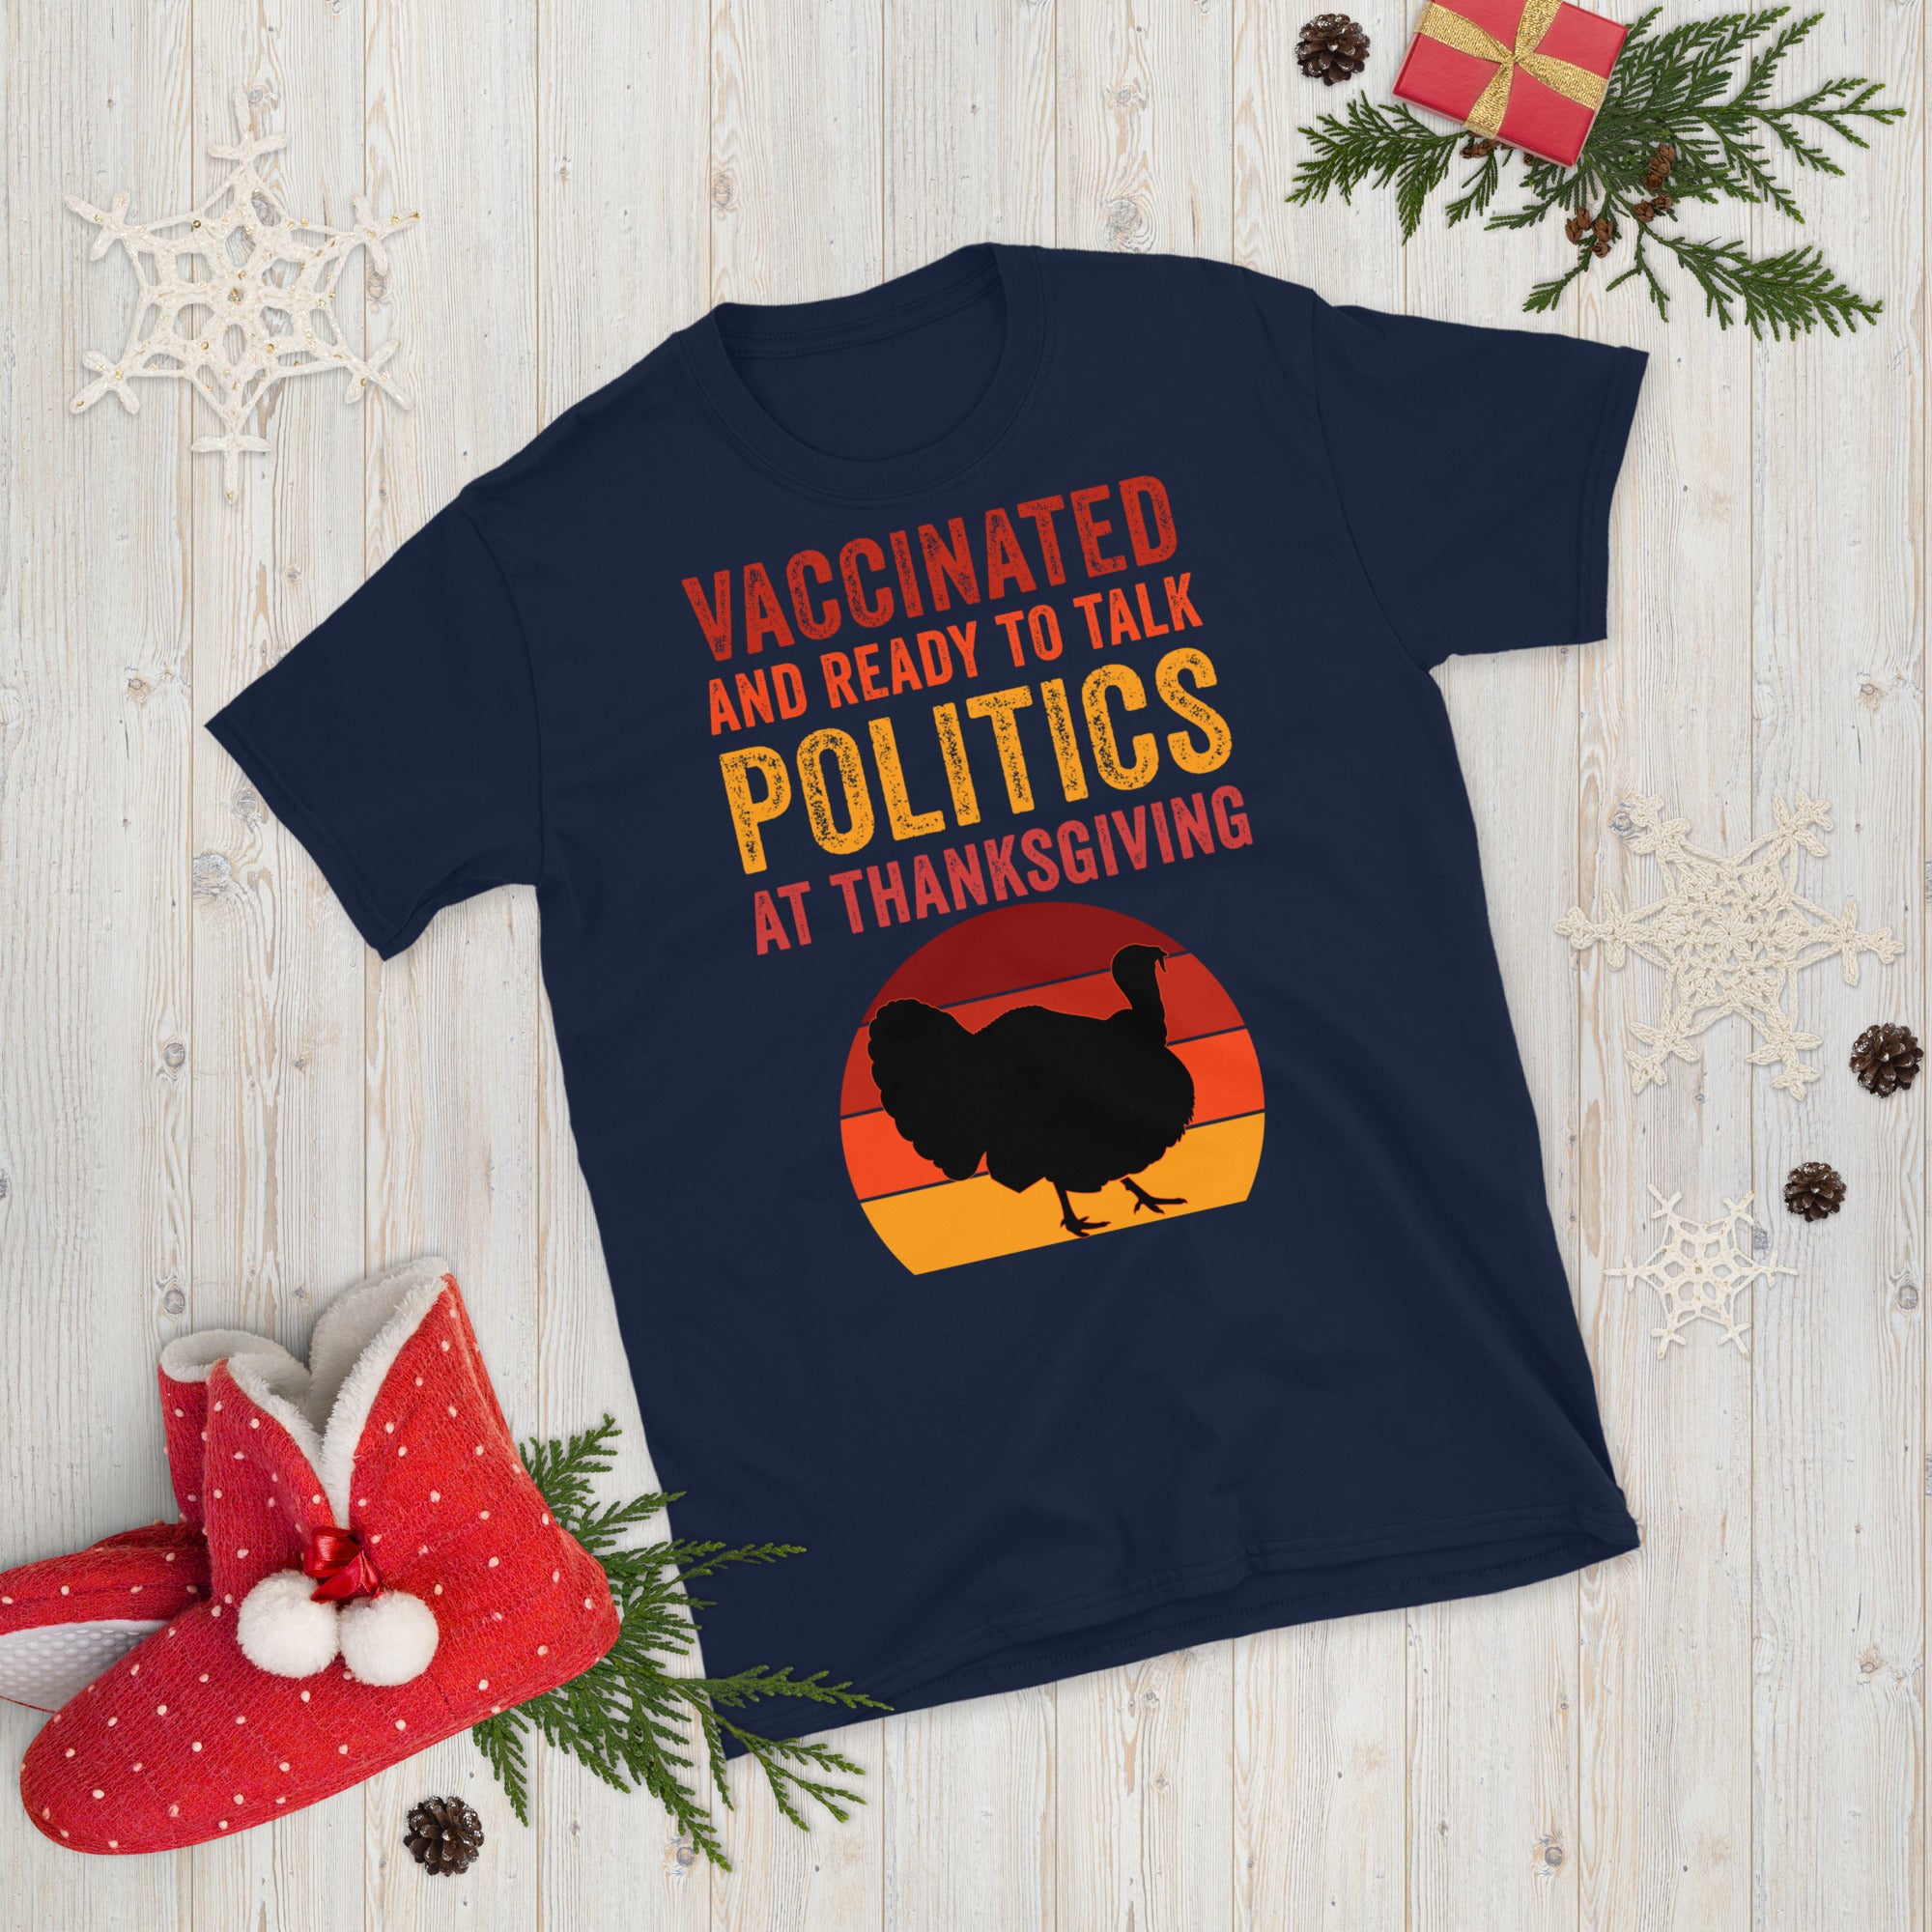 Vaccinated And Ready To Talk Politics At Thanksgiving Shirt, Thanksgiving Turkey Shirt, Thanksgiving Family T Shirt, Funny Vaccine Tee - Madeinsea©